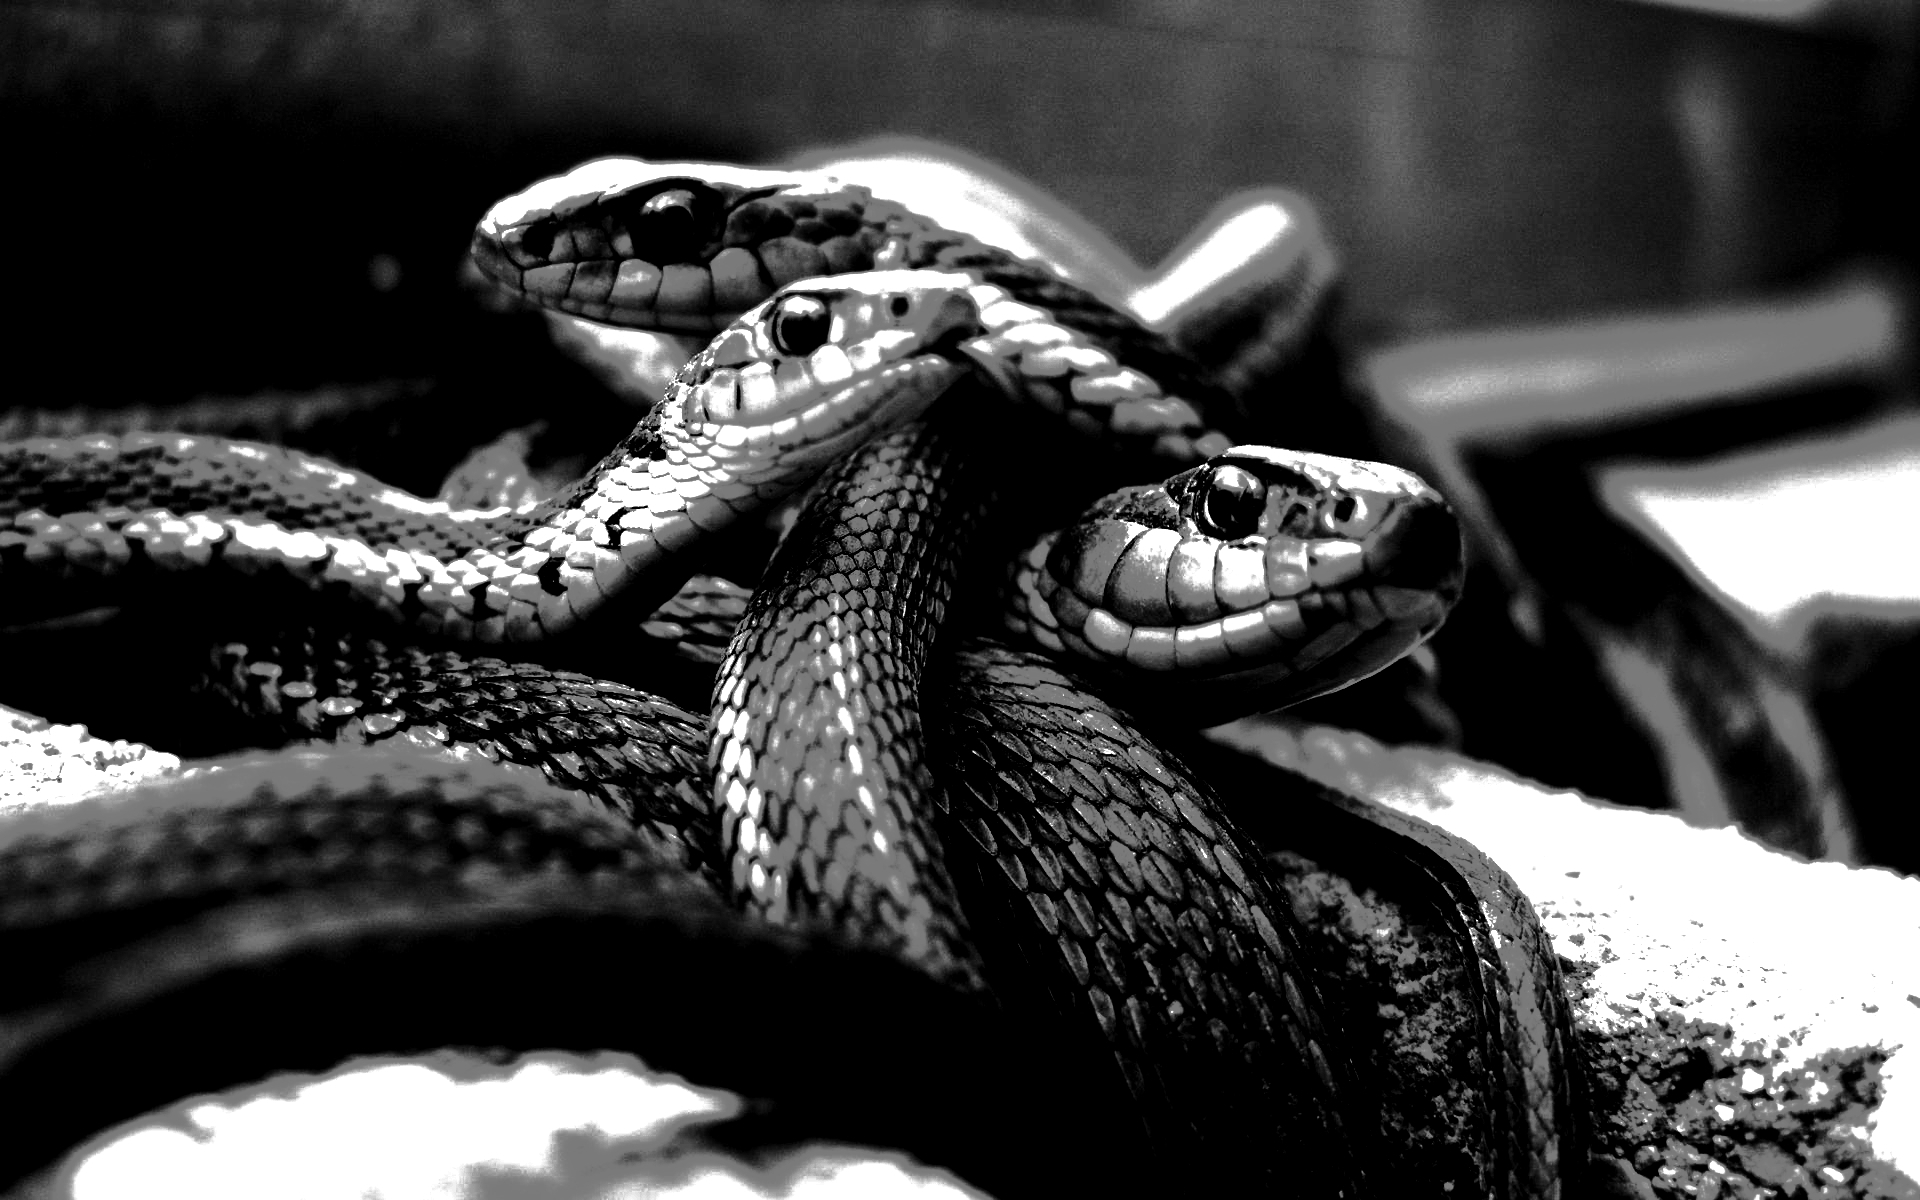 What does it mean when I dream about black snakes?